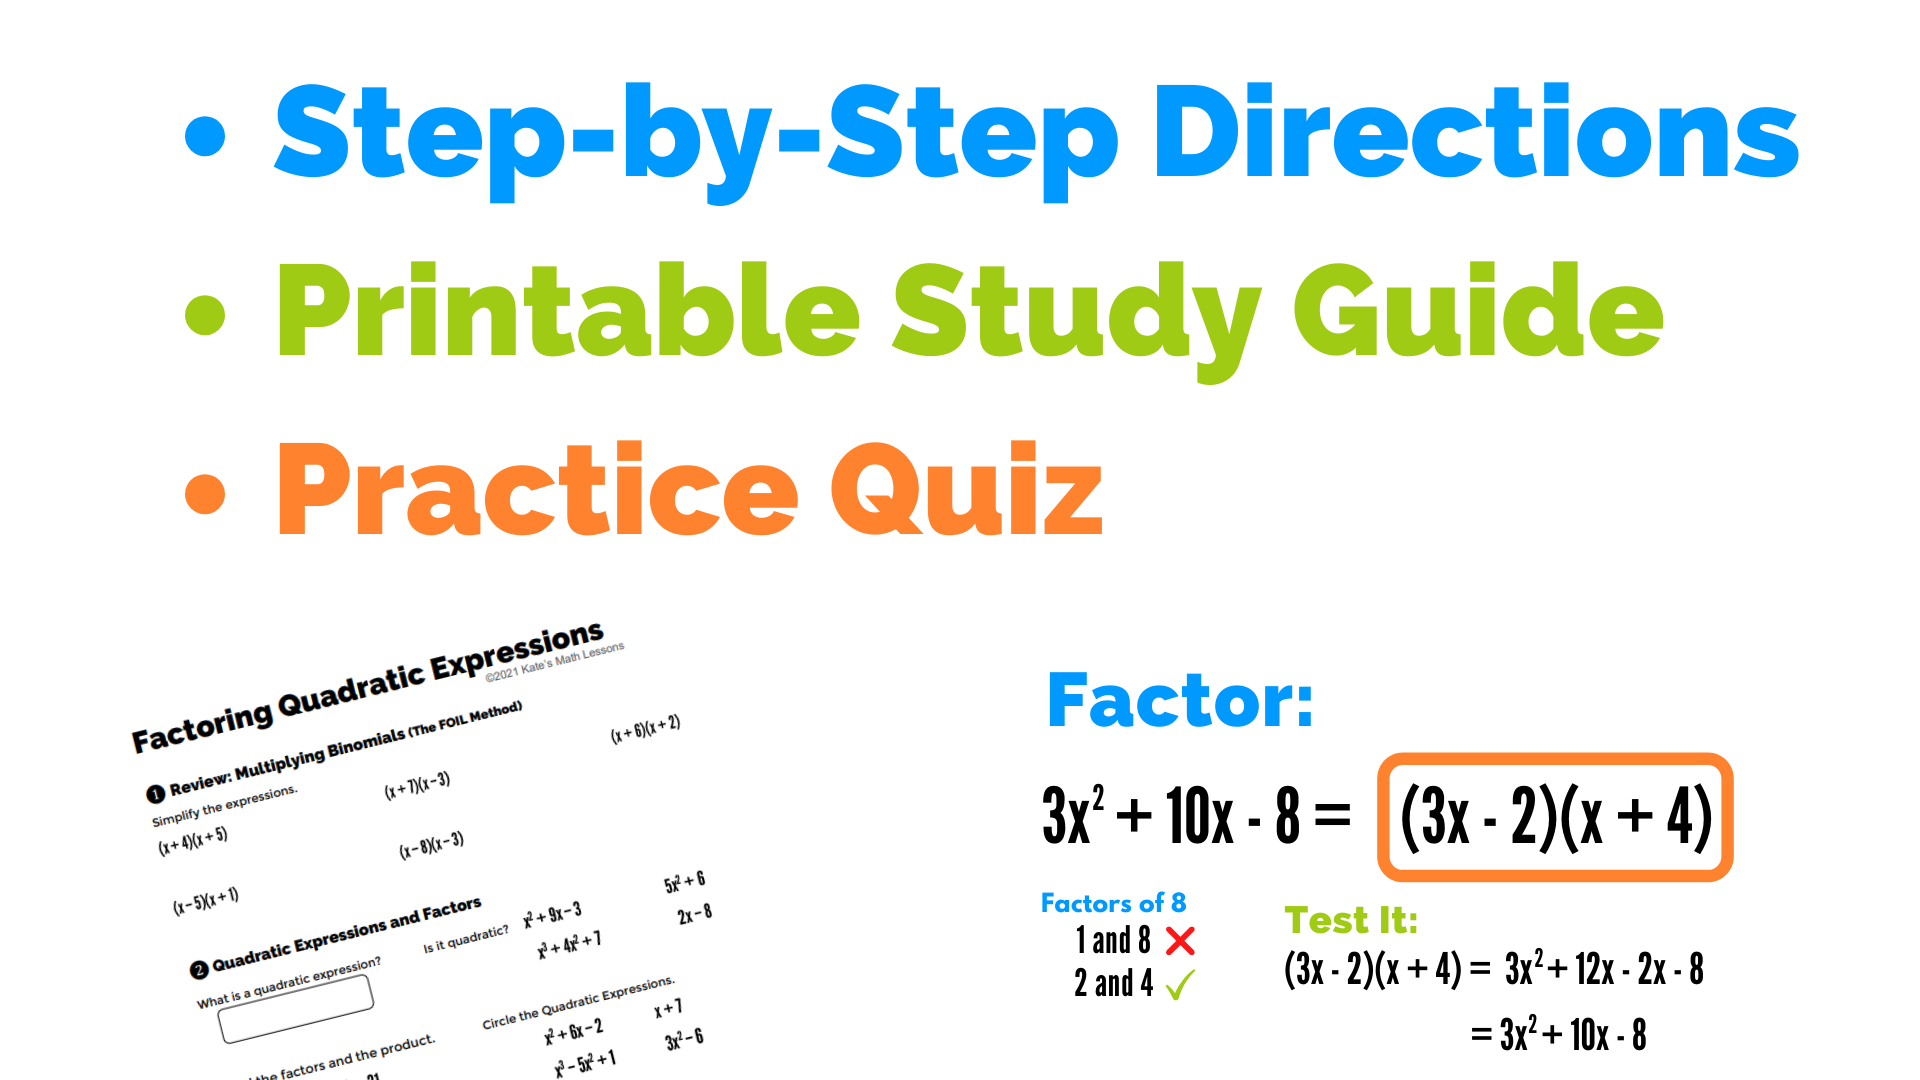 Factoring Quadratics Step-by-Step Directions, Printable Study Guide, Practice Quiz Video Course